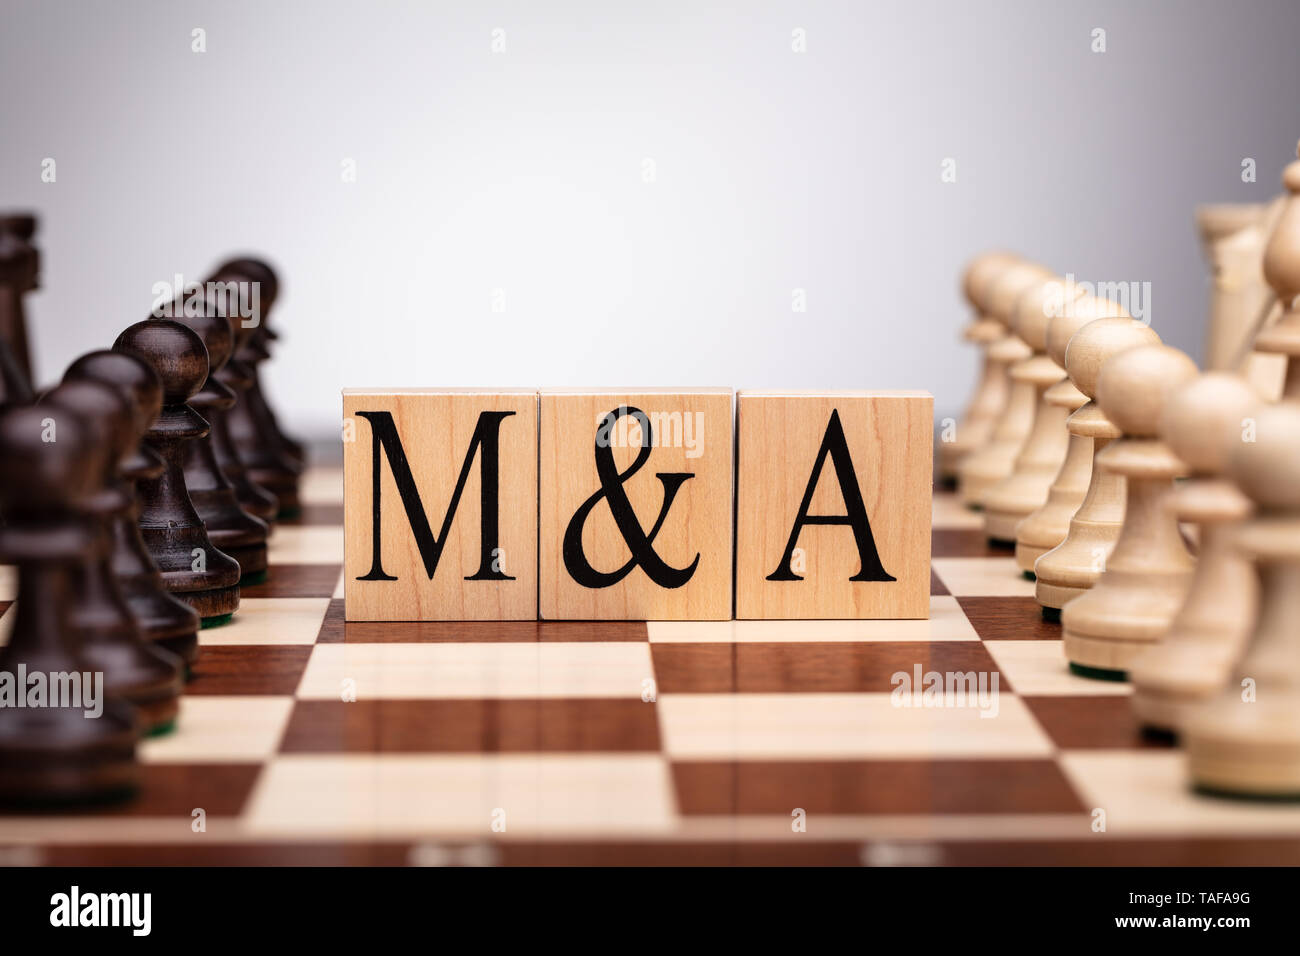 Chessboard With Wooden Blocks Showing Mergers And Acquisitions Concept Stock Photo